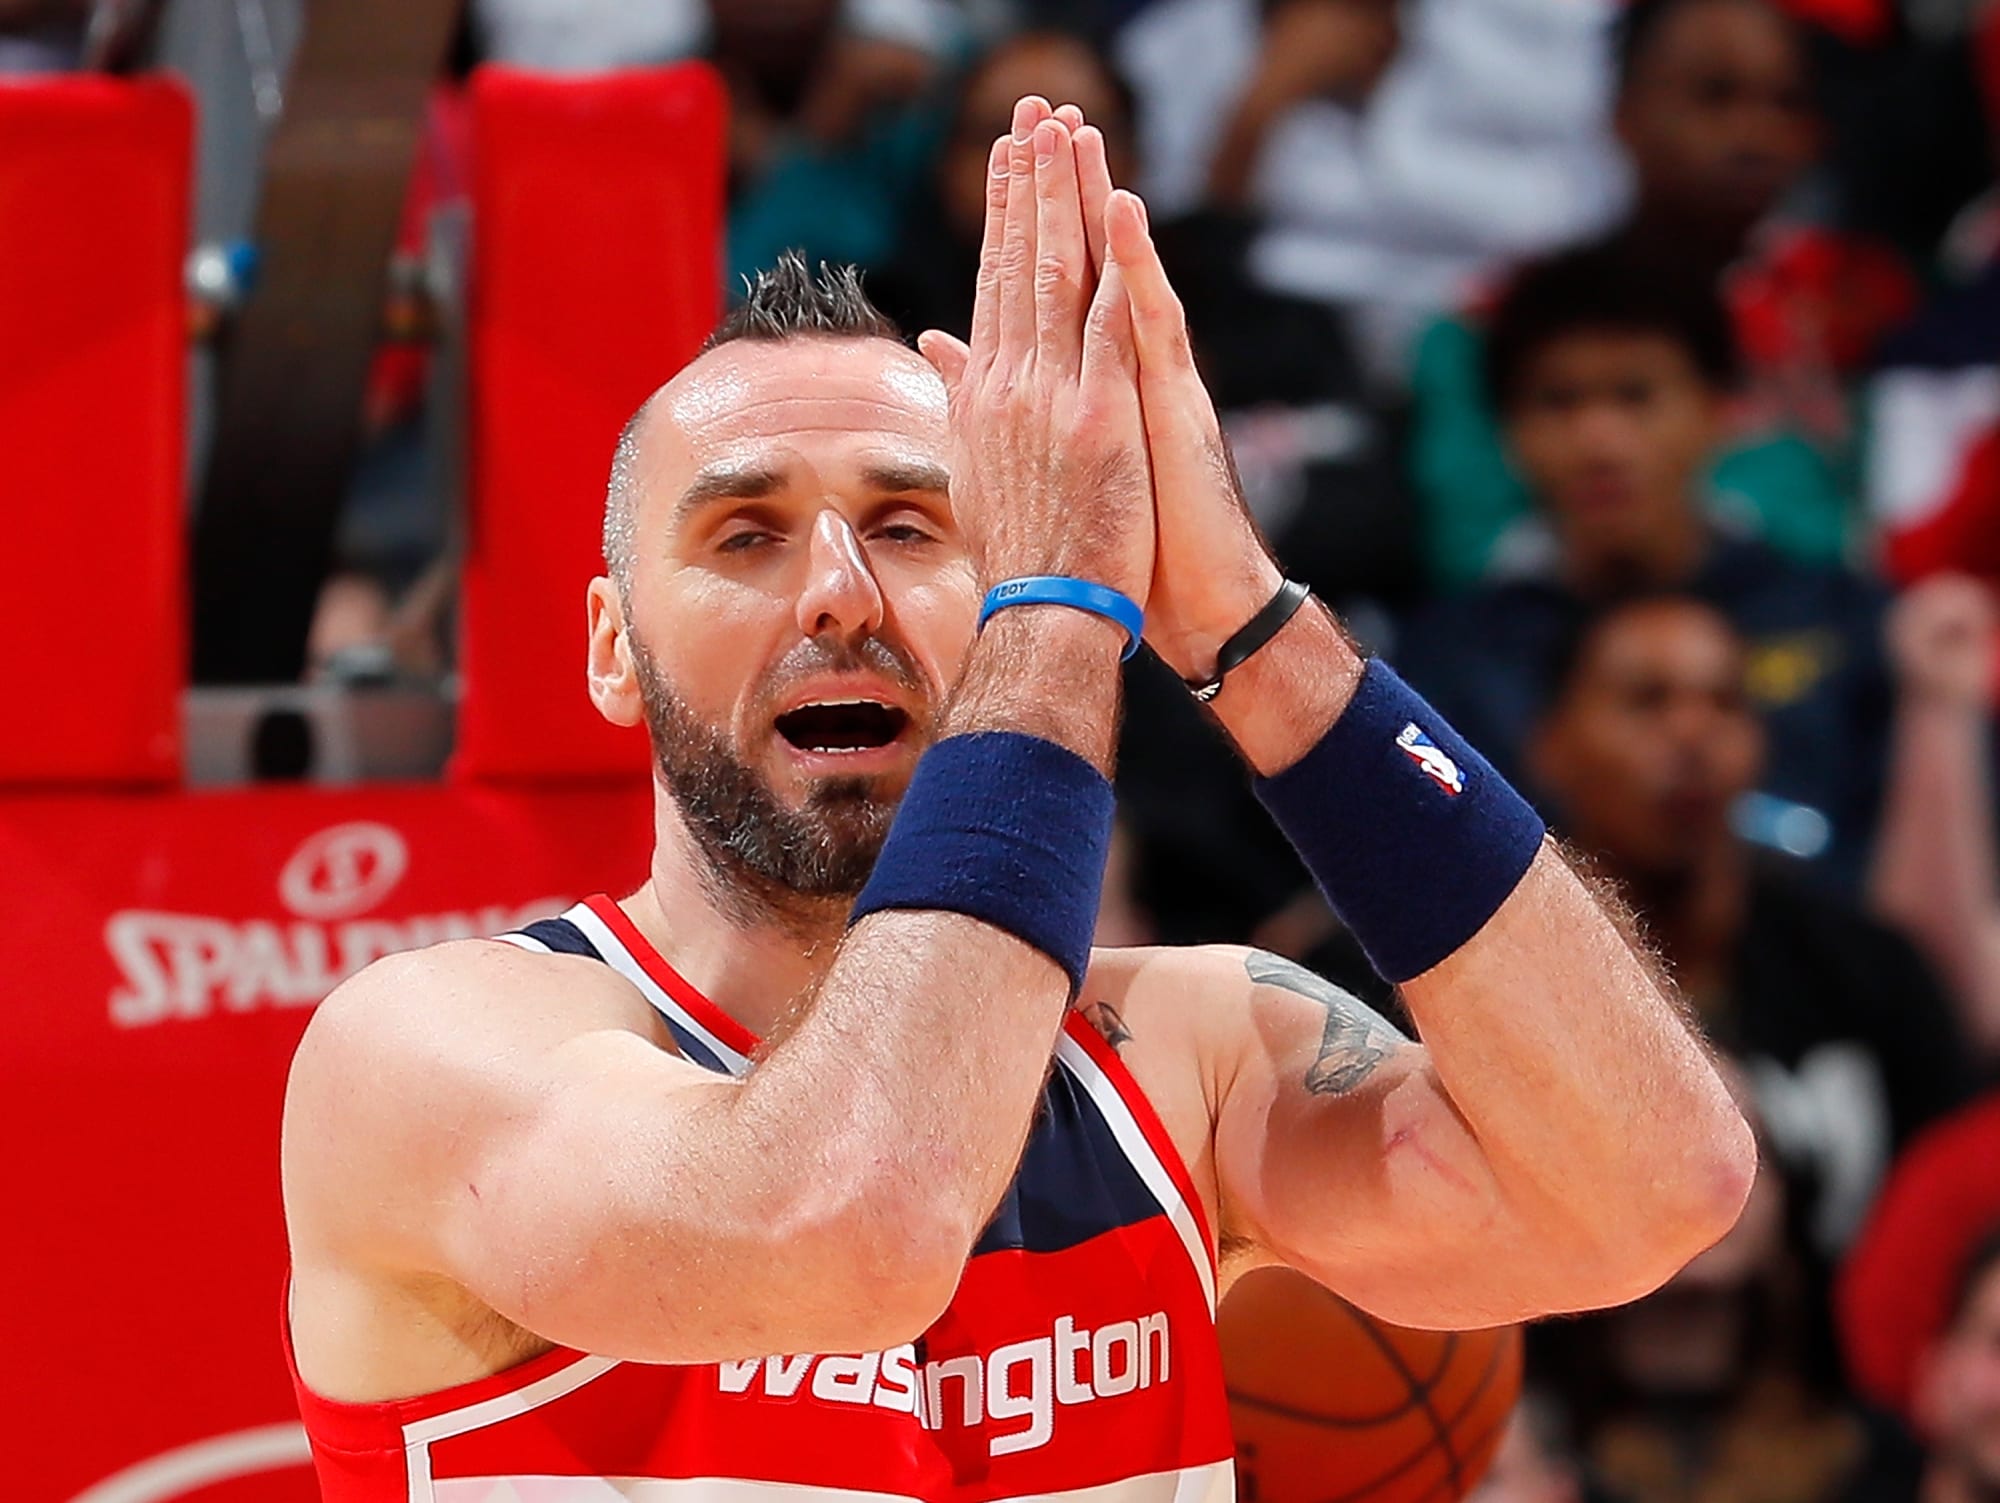 Washington Wizards Make It Too Easy for Other Teams